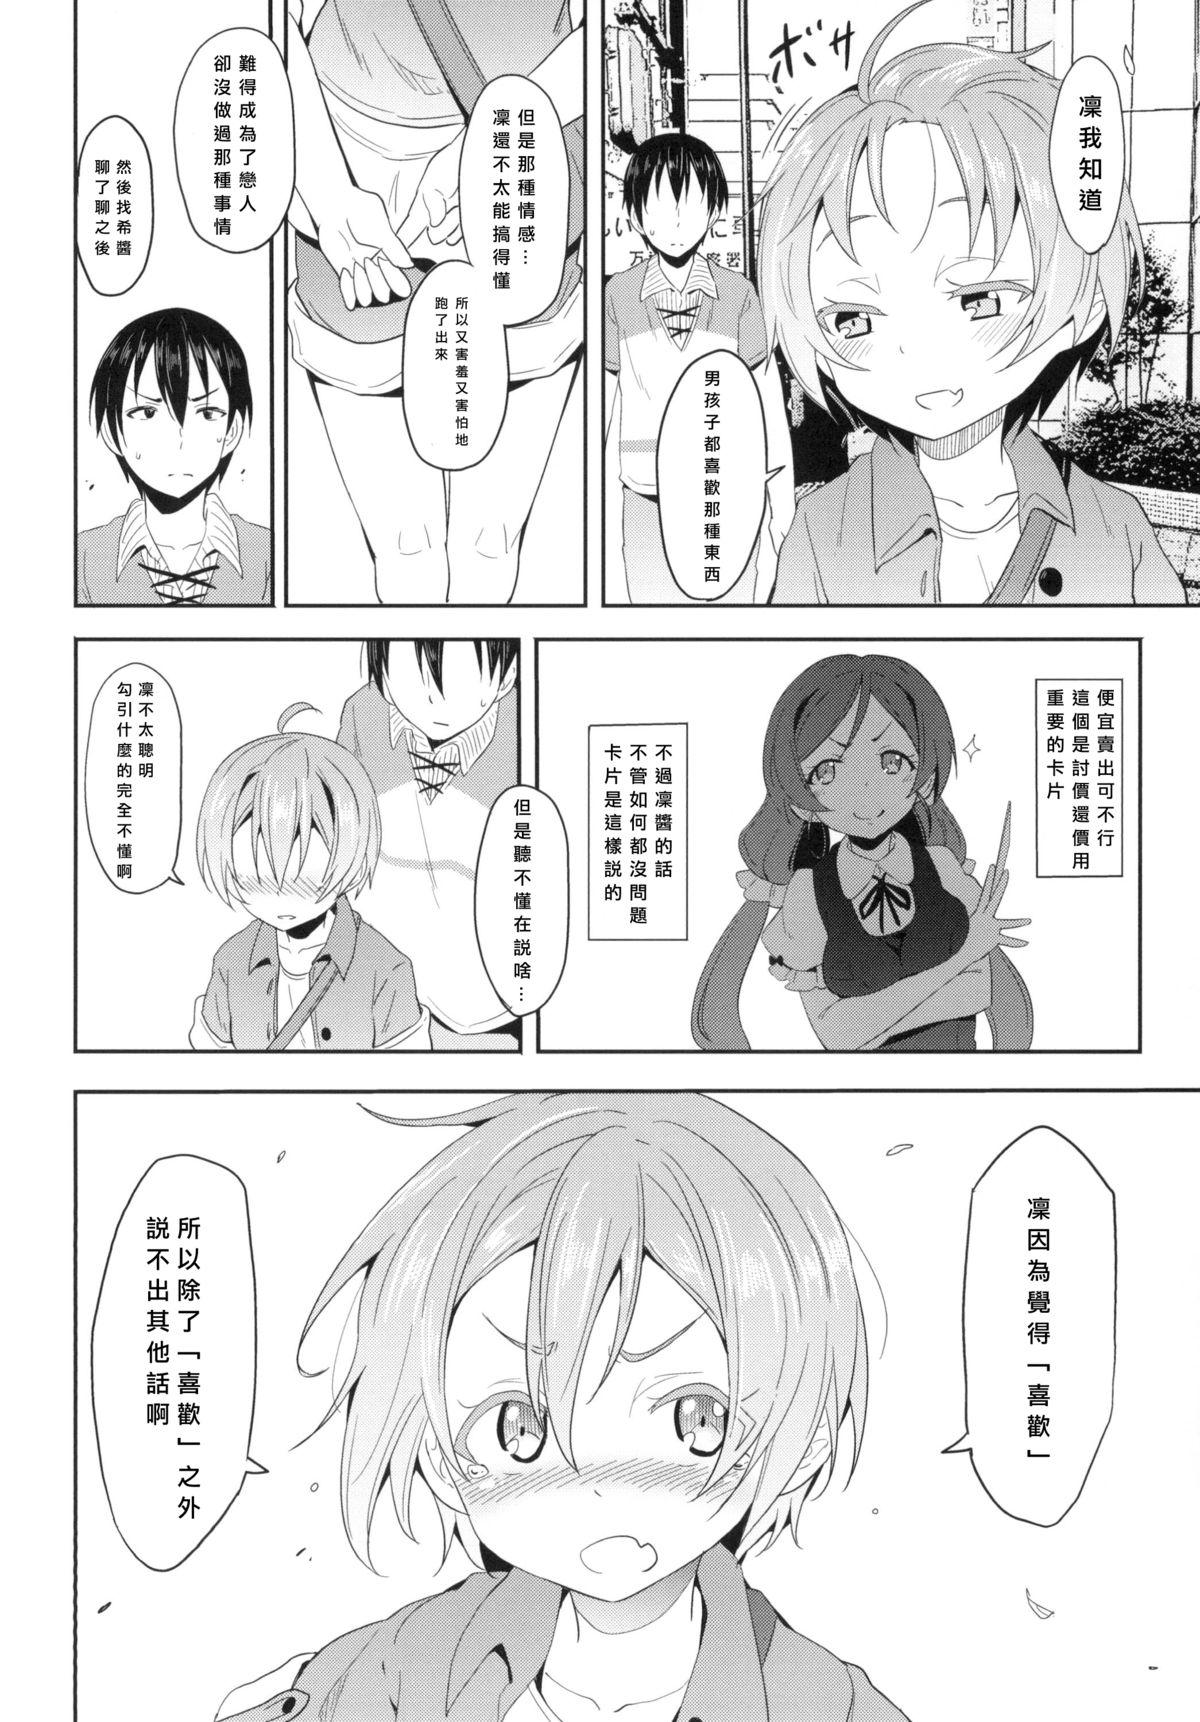 Interracial Rin-chan to Issho. - Love live Bhabi - Page 6